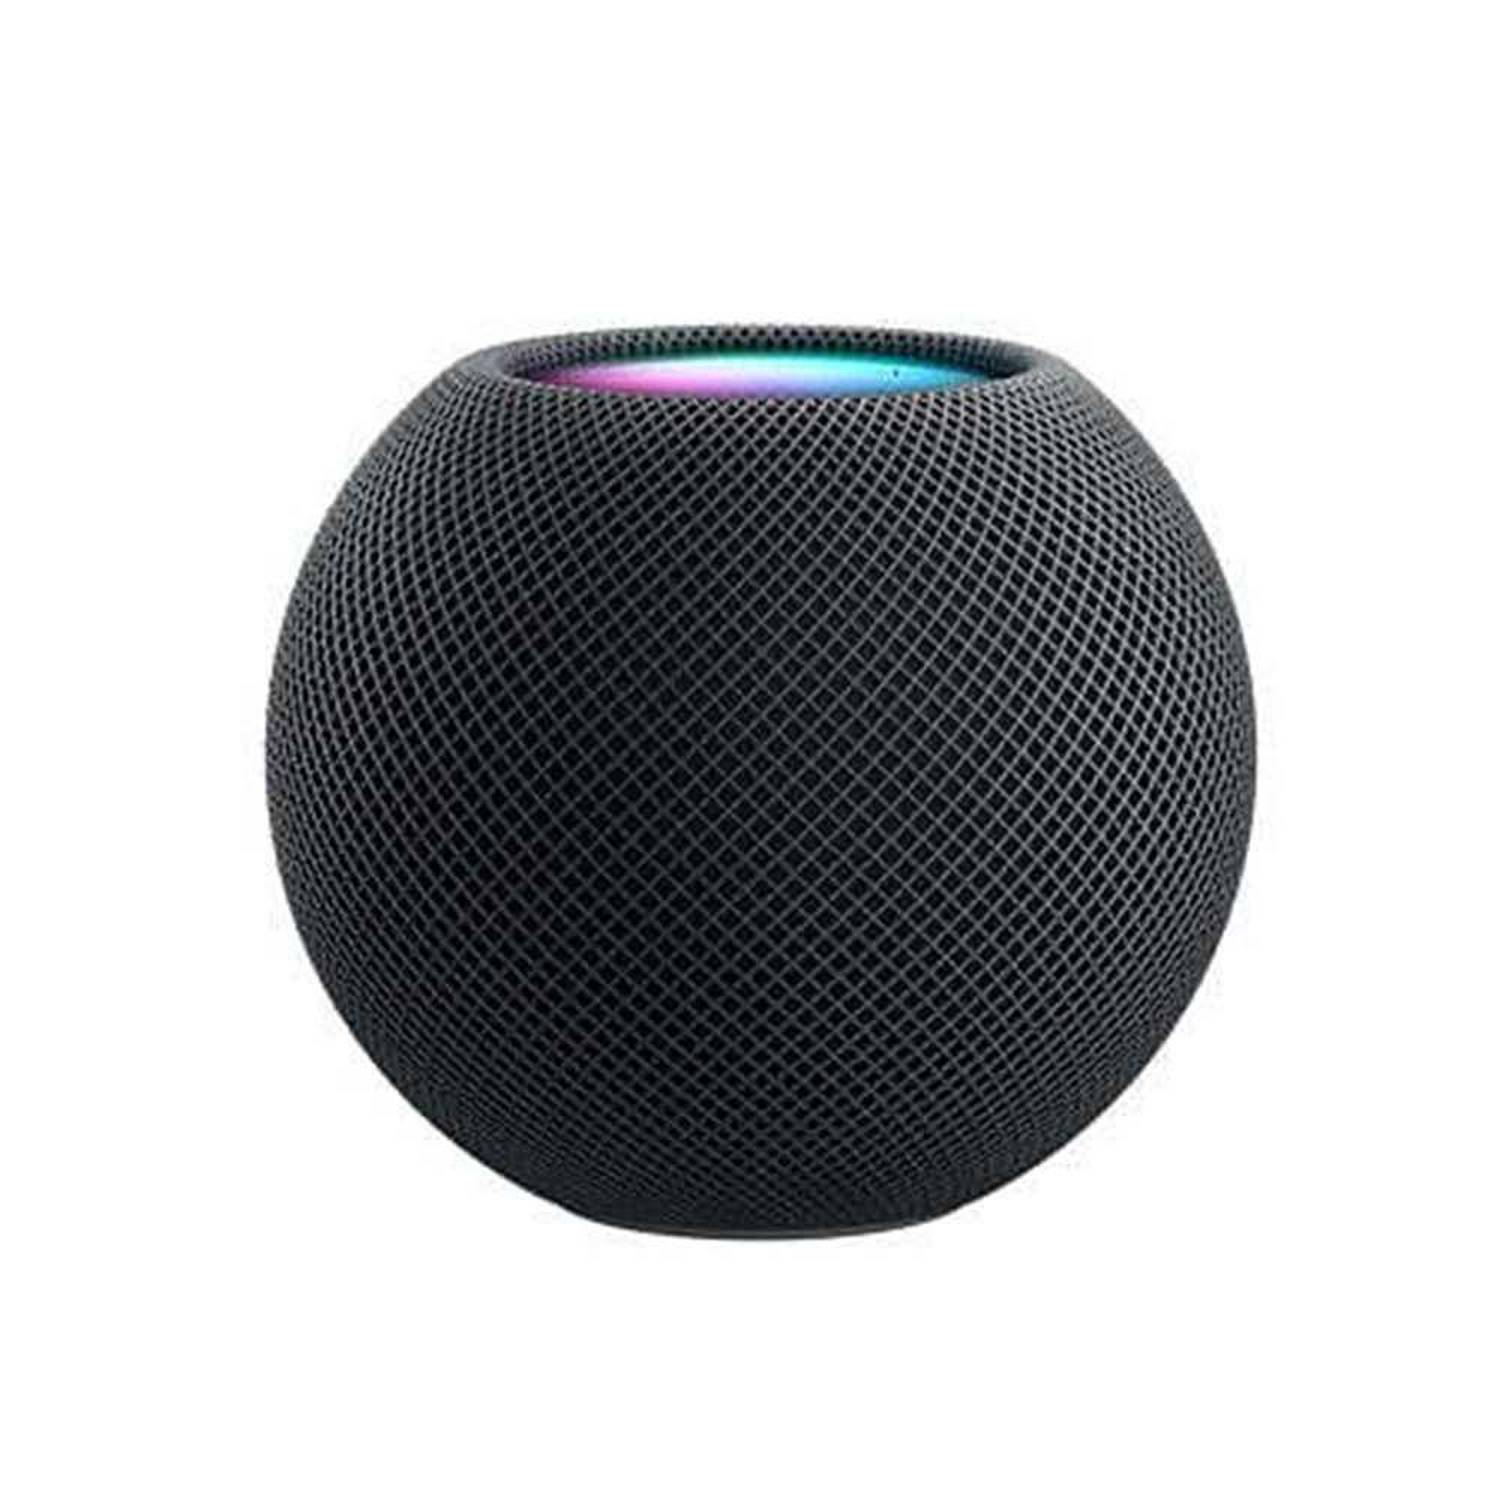 Apple HomePod Mini review: incredible sound for an impressive price